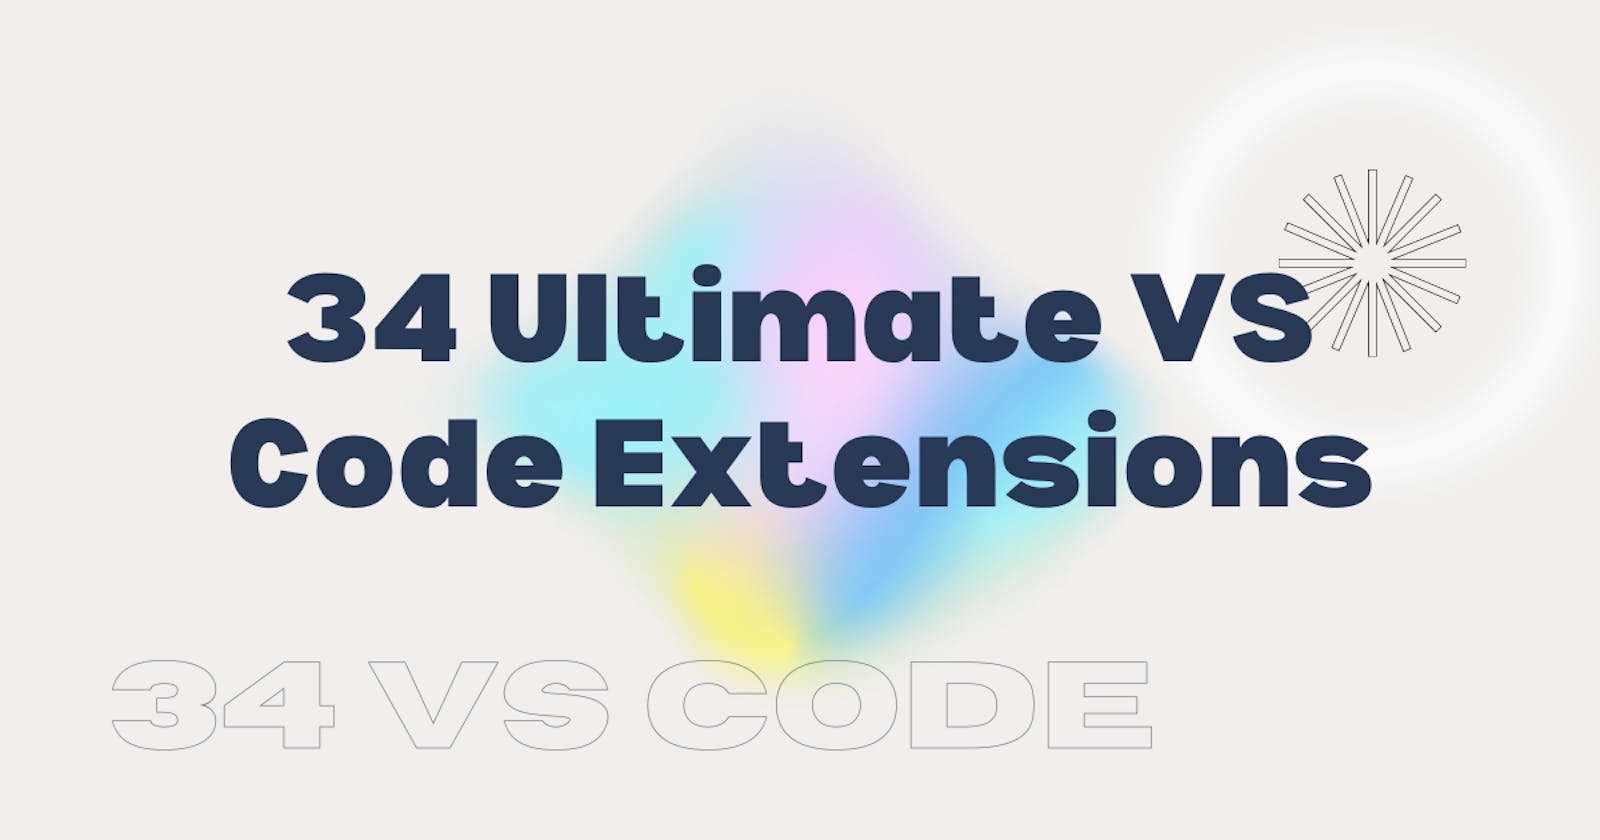 34 Ultimate VS Code Extensions to Increase Productivity! 💪